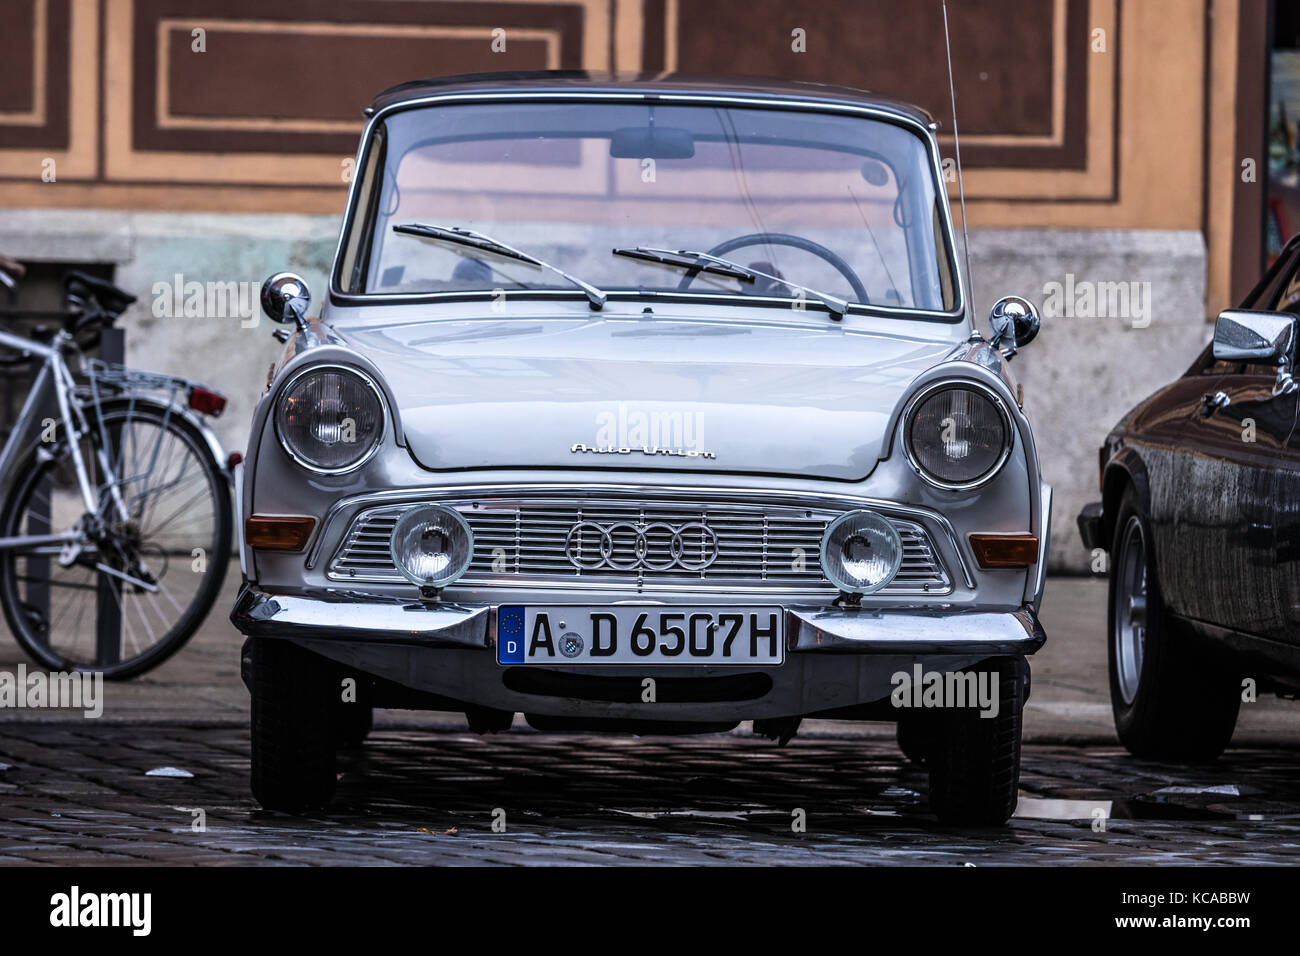 Augsburg, Germany - October 1, 2017: Auto Union DKW F11 oldtimer car at the Fuggerstadt Classic 2017 Oldtimer Rallye on October 1, 2017 in Augsburg, G Stock Photo